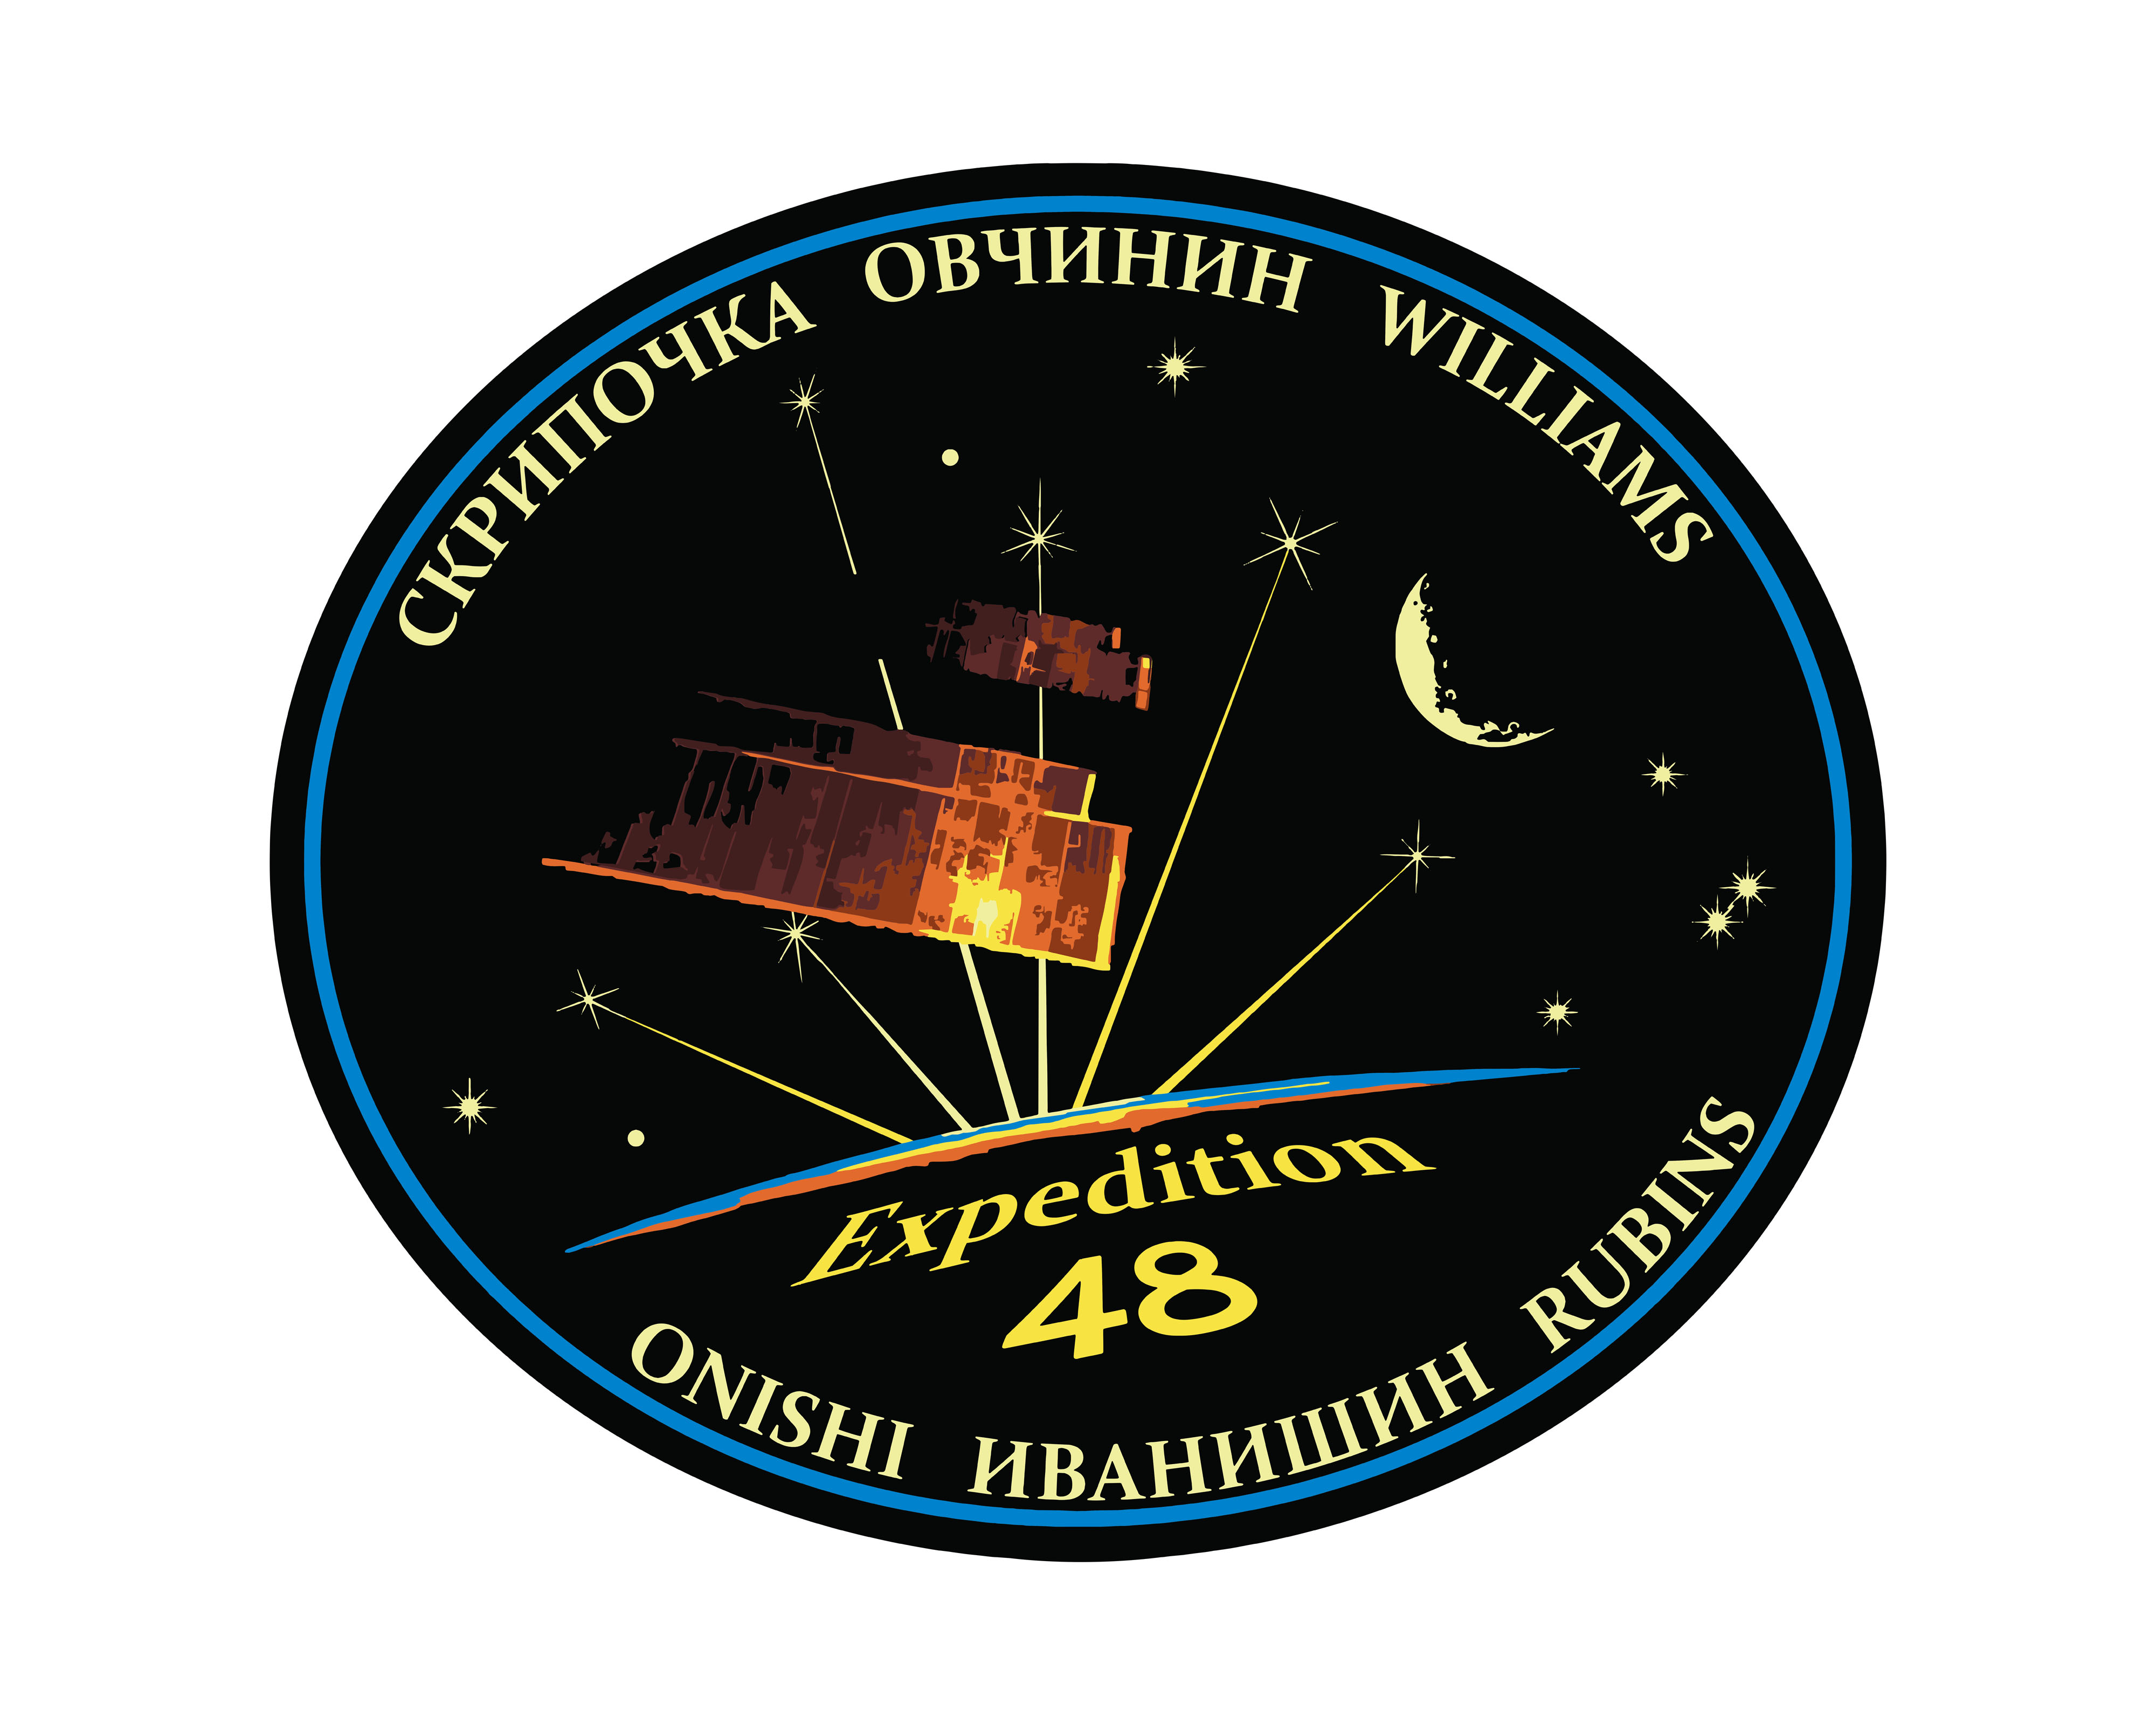 Expedition 48 Official Crew Insignia